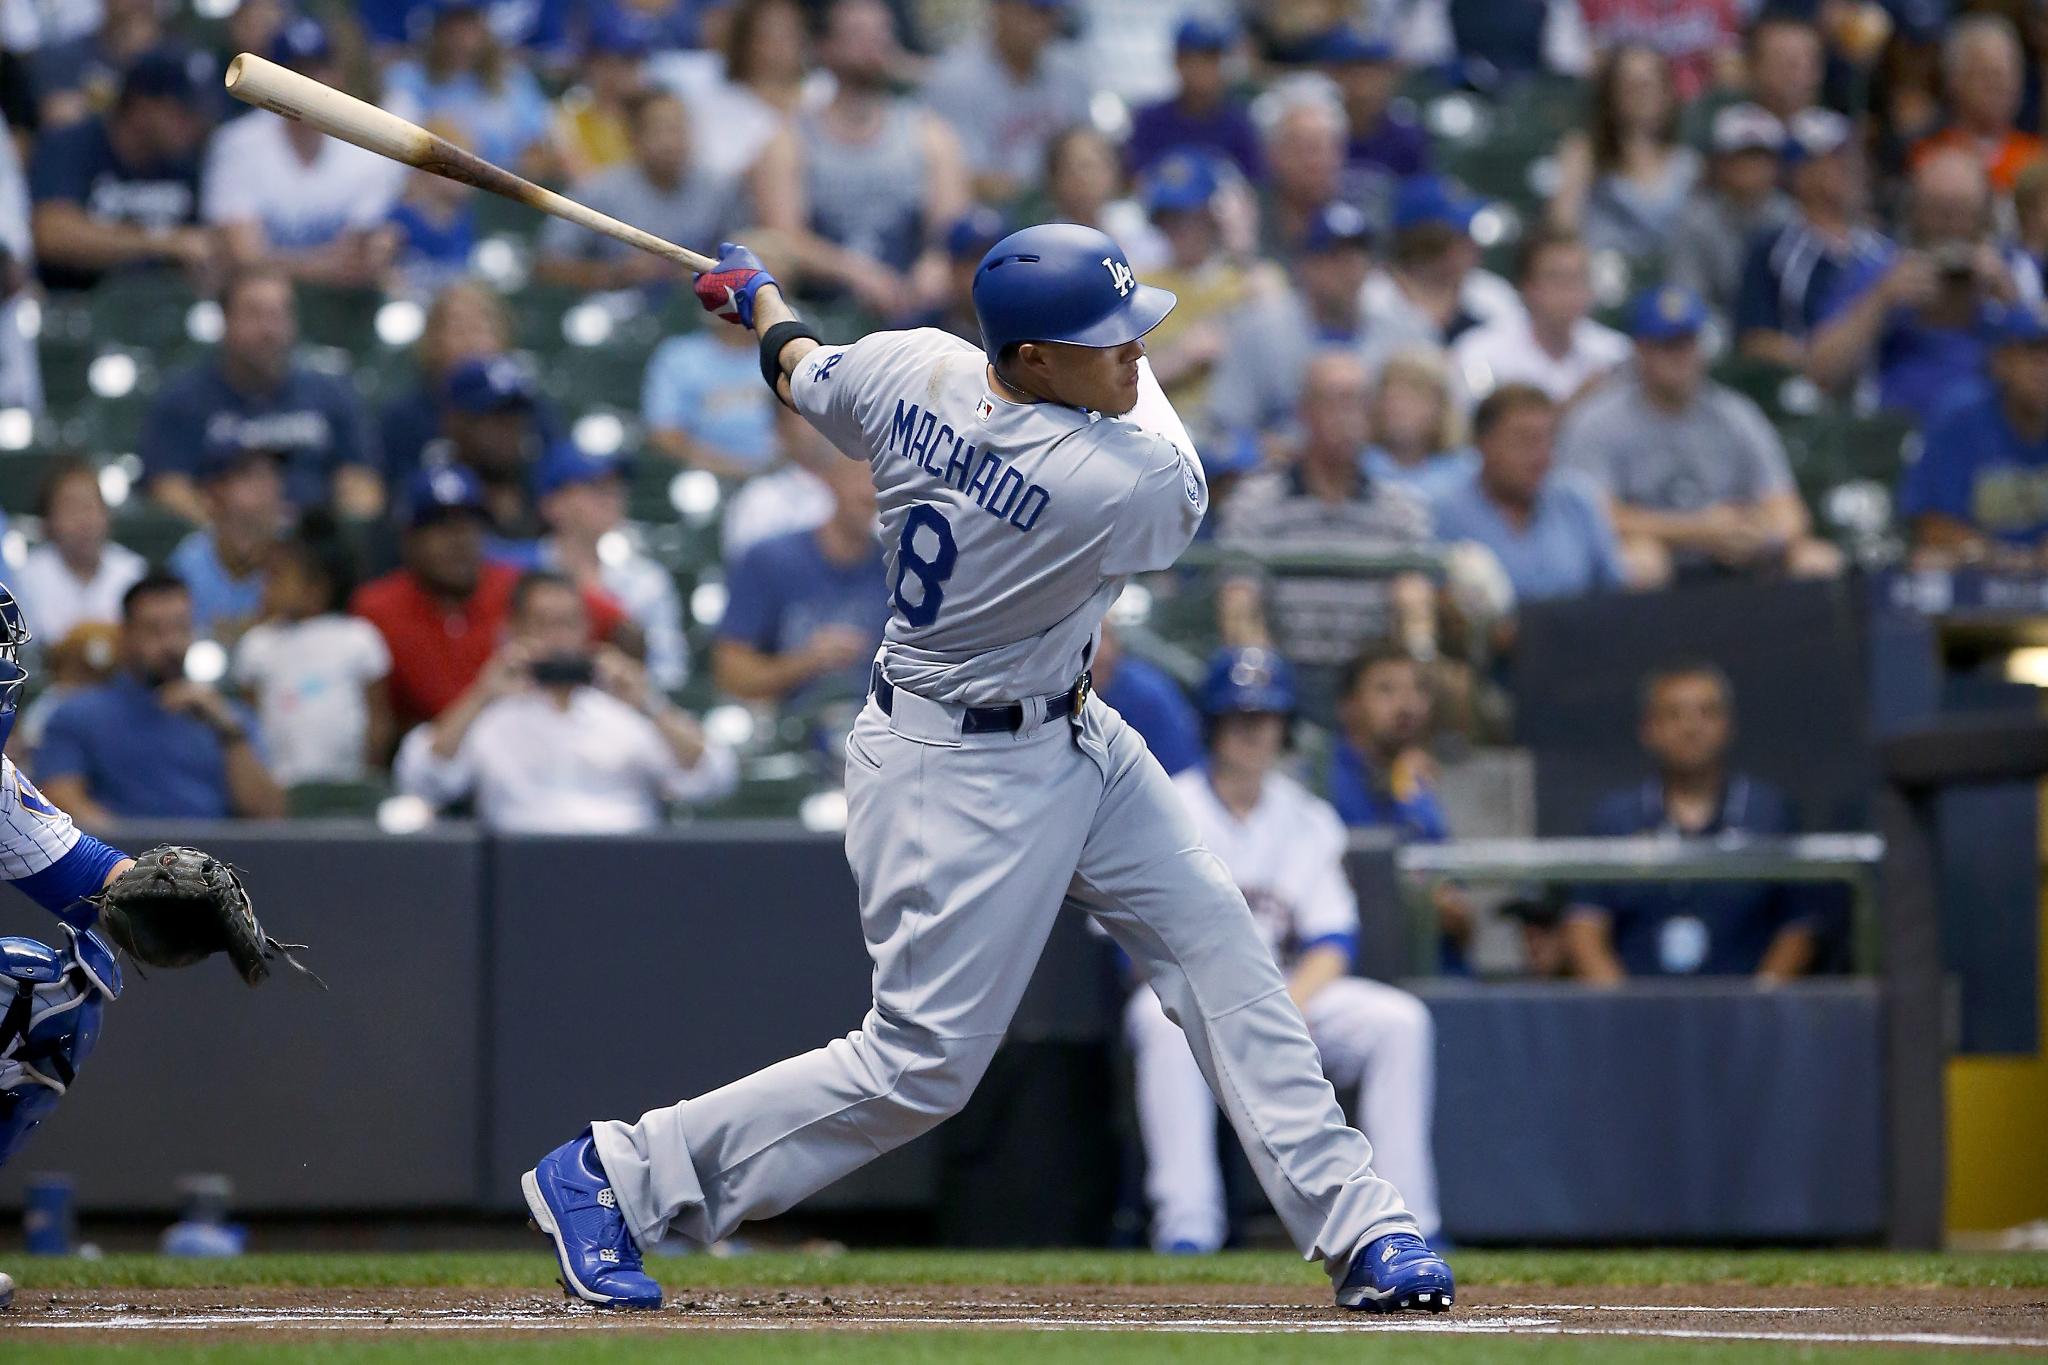 Manny Machado's Dodger Debut Doesn't Disappoint